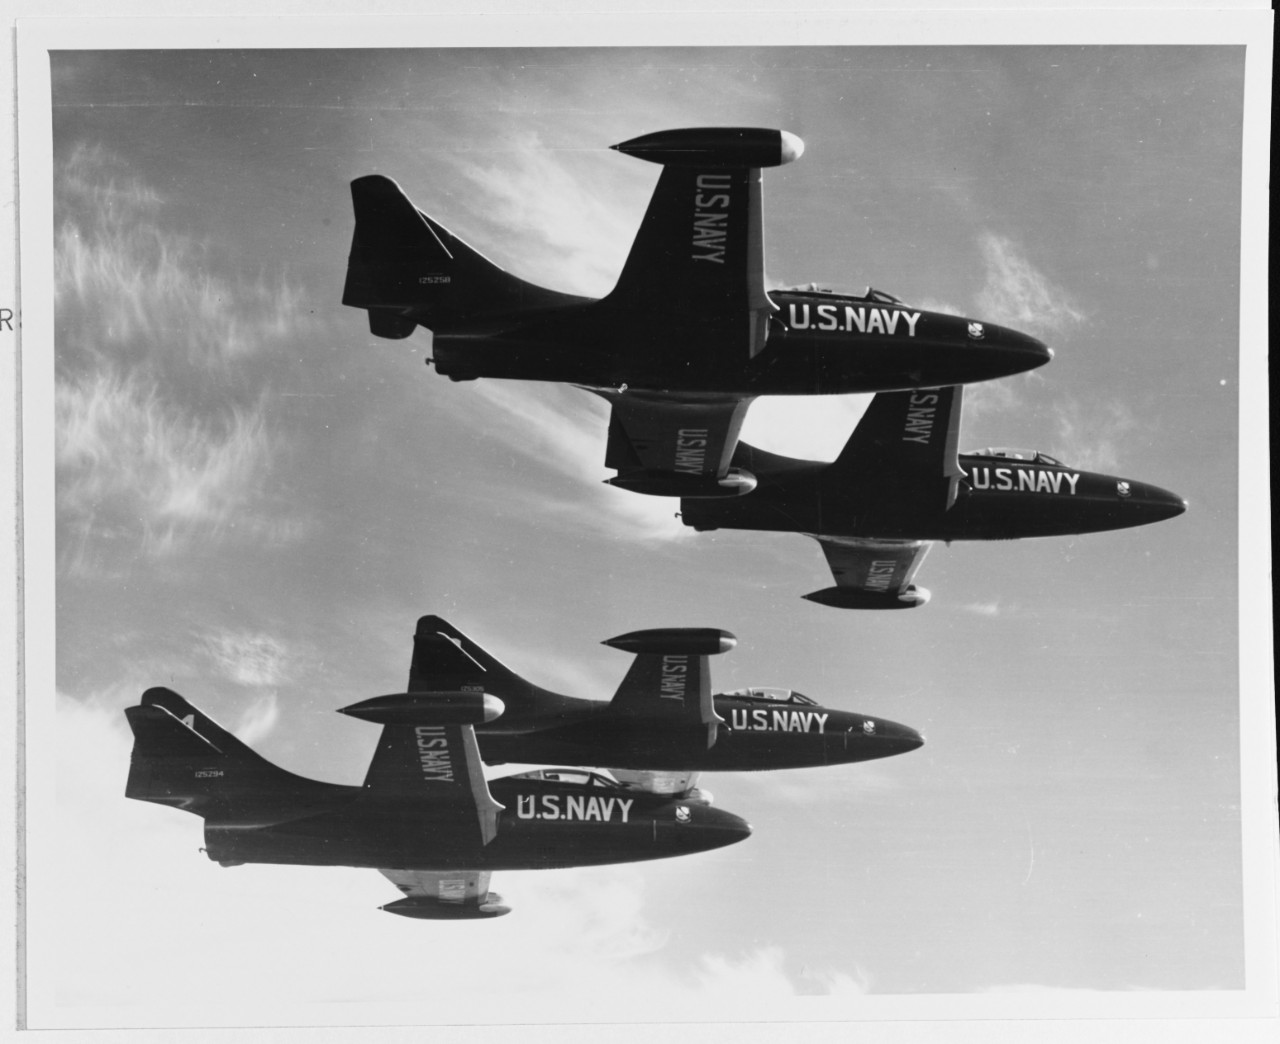 F9F-5 "Panther" fighters